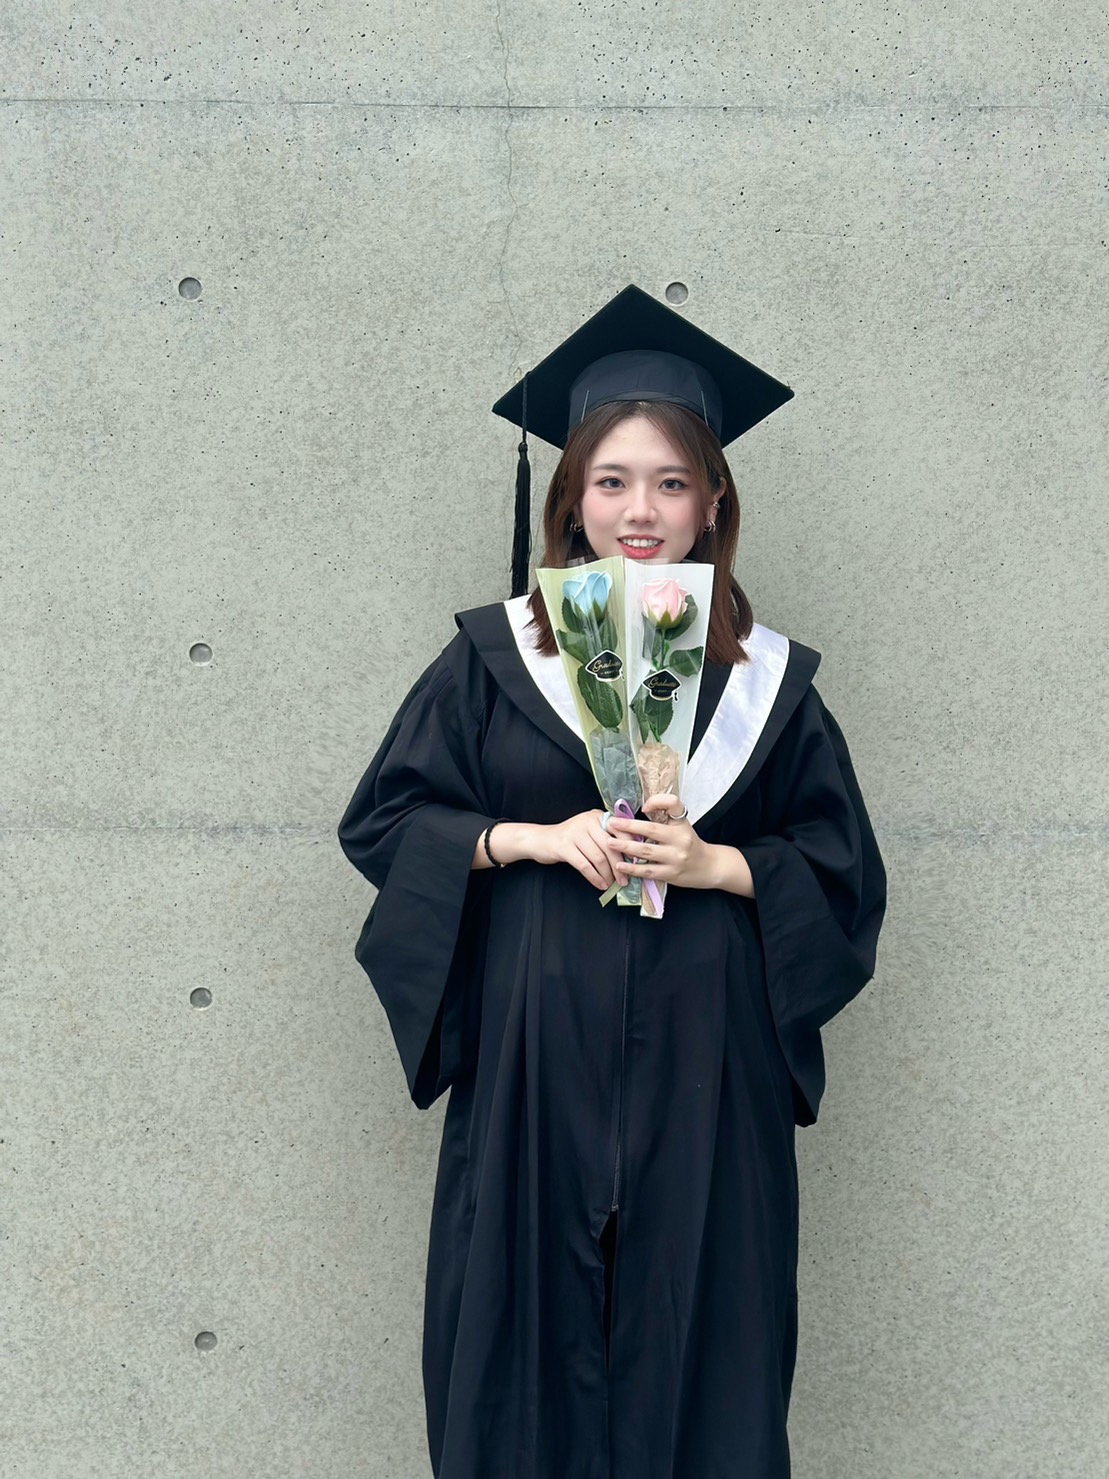 The photo features Cai-Li Weng, a graduate from the Department of Audiology and Speech-Language Pathology at Asia University, who successfully passed this year's national examination for audiologists and secured the impressive second position